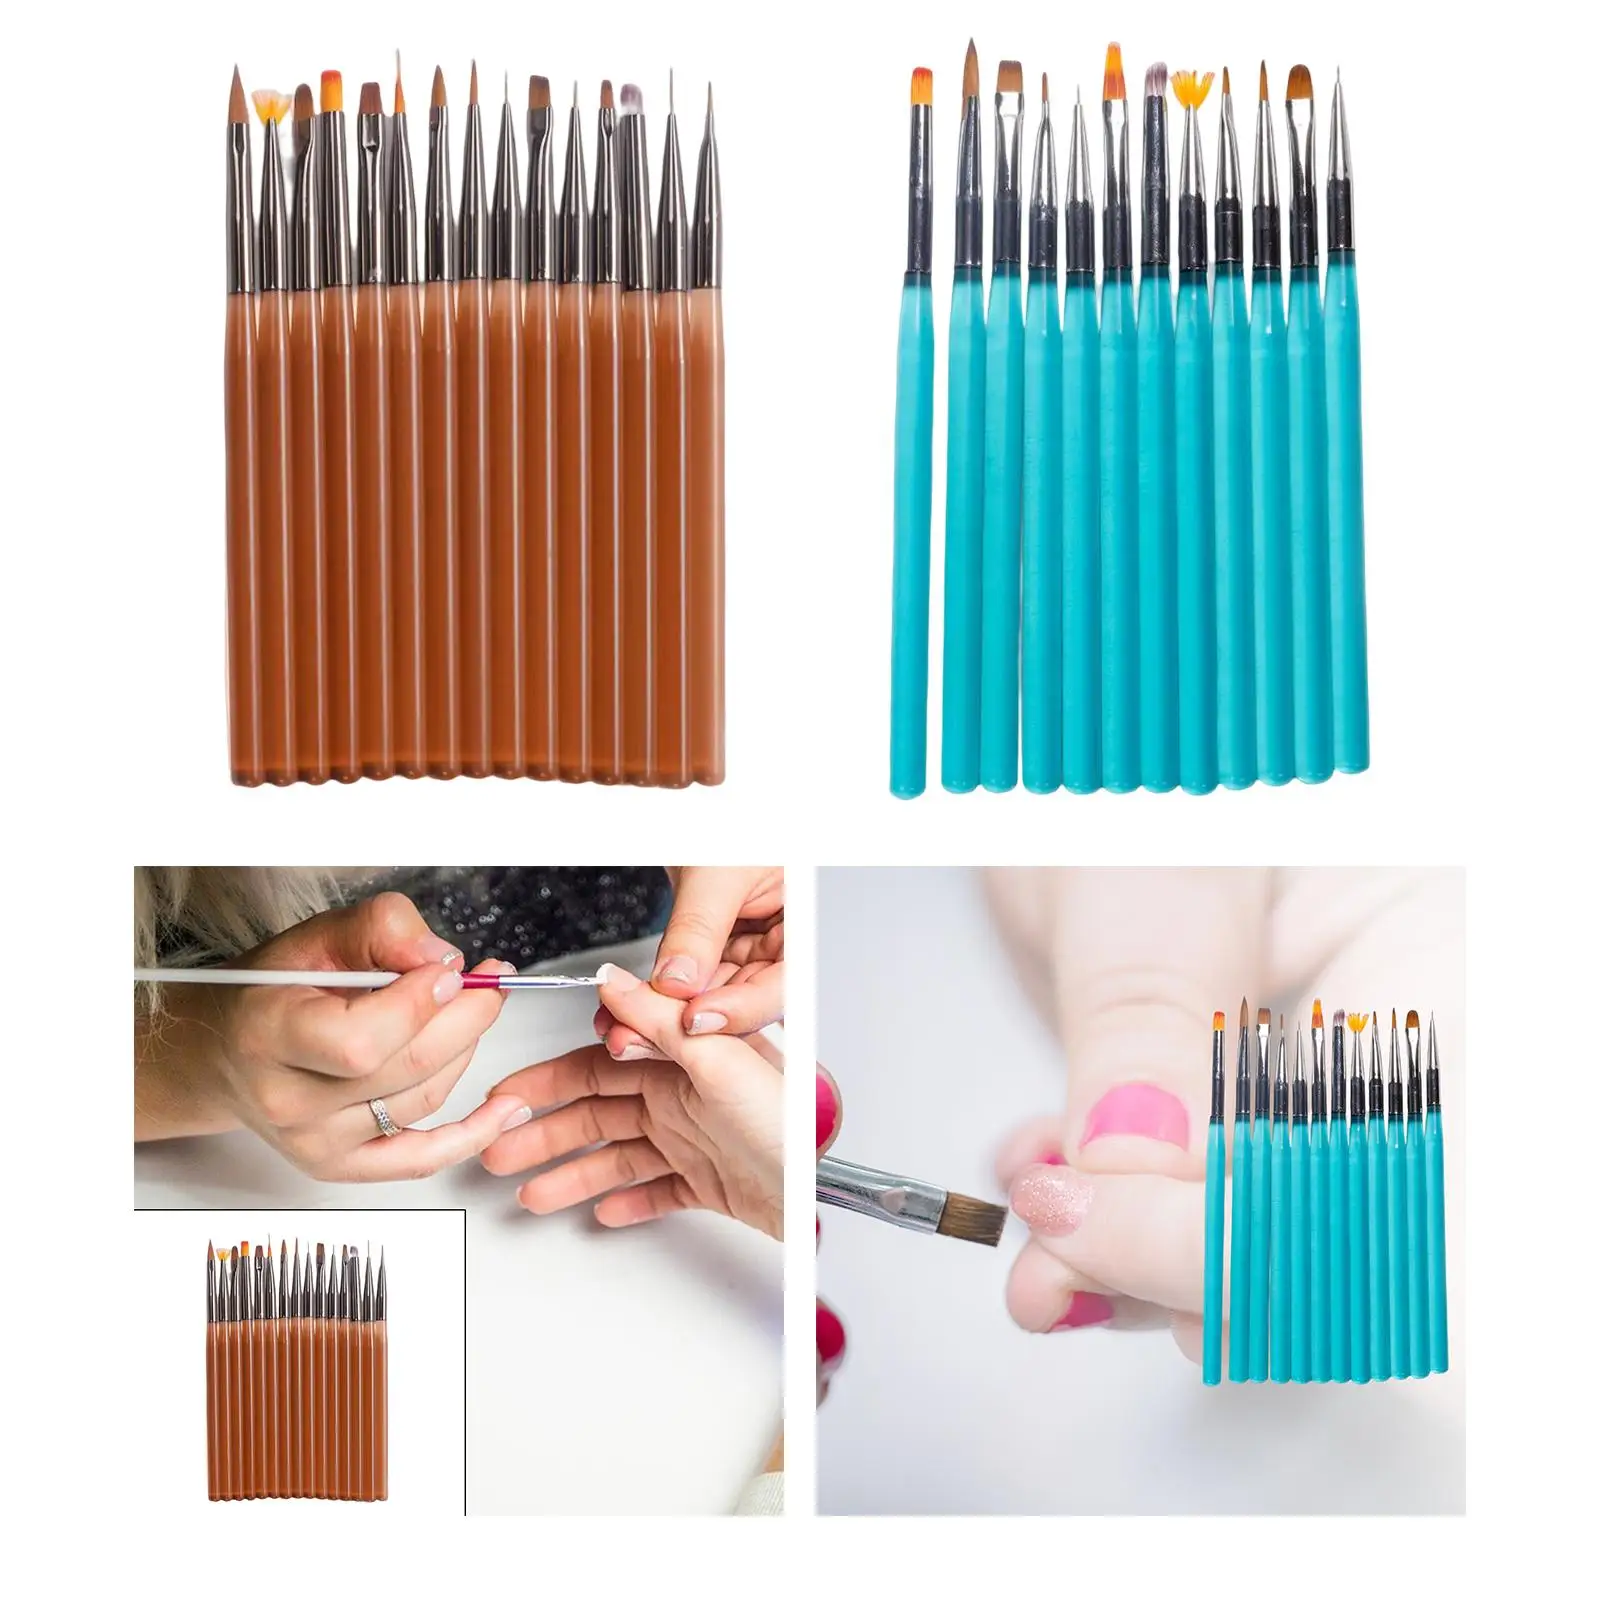 Nail Art Brushes Set Nail Painting Brushes for Women Girls Lightweight Drawing Tools Nail Liner Brushes for Salon Use Home